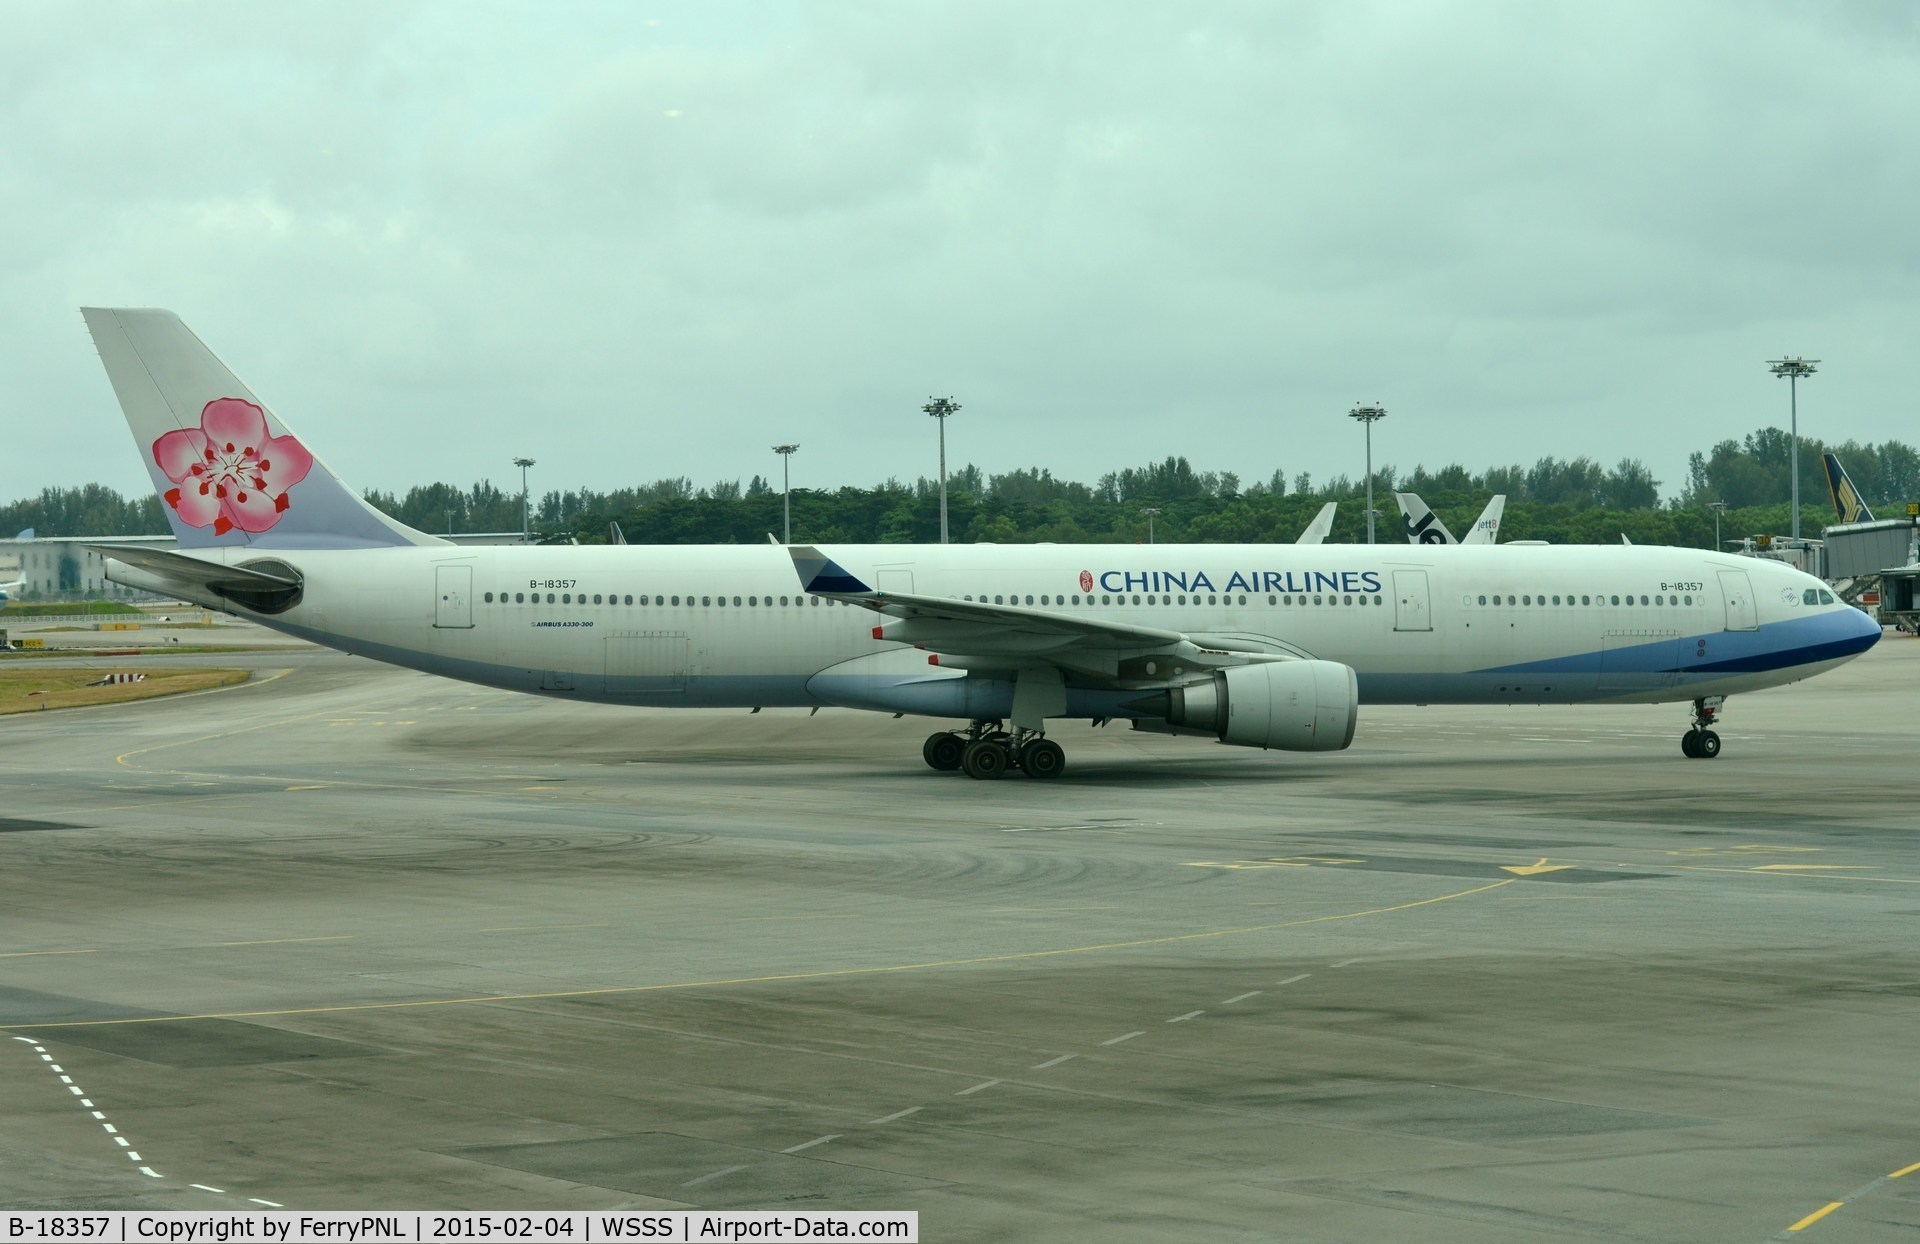 B-18357, 2011 Airbus A330-302 C/N 1278, China Airlines A333